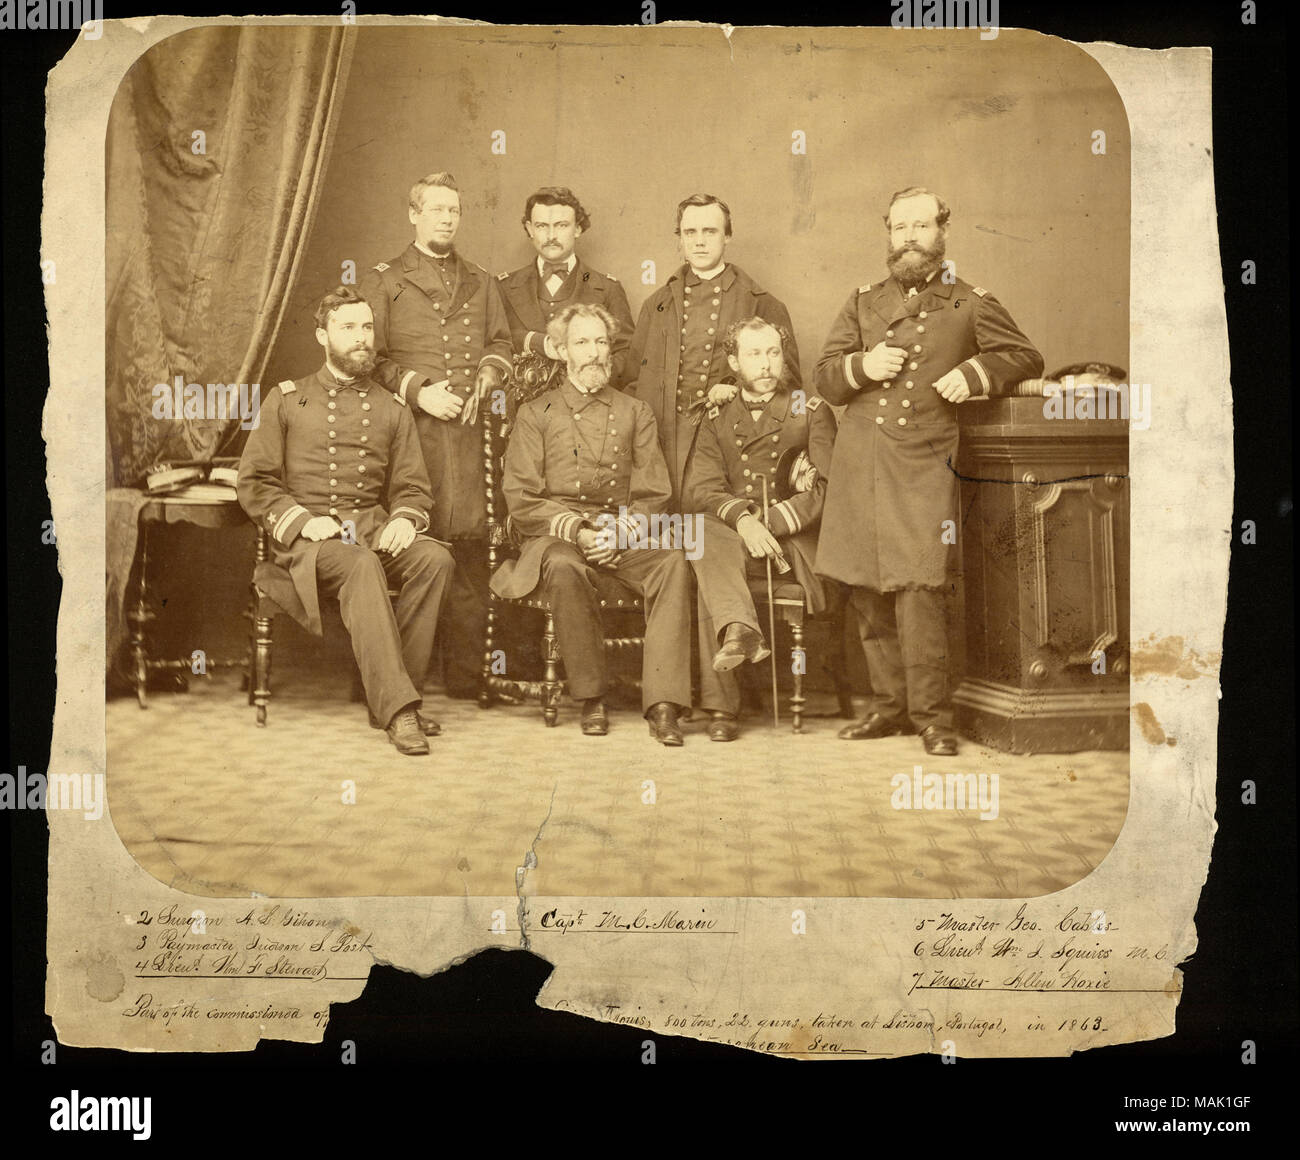 Full-length group portrait of seven men in uniform. The men have numbers written on their images that corrrespond to a handwritten identification below the print. 1. Capt. M. C. Marin; 2. Surgeon A. L. Gihon; 3. Paymaster Judson S. Post; 4. Lieut. Wm. F. Stewart; 5. Master Geo. Cables; 6. Lieut Wm. Squires M. C.; 7. Master Allen Hoxie. A brief caption handwritten below the image reads: 'Part of the commissioned officers of the U.S. Sloop of war Saint Louis, 800 tons, 22 guns, taken at Lisbon, Portugal, in 1863 - while on a 3 years Cruise in the Mediterranean Sea.' A portion of the original cap Stock Photo